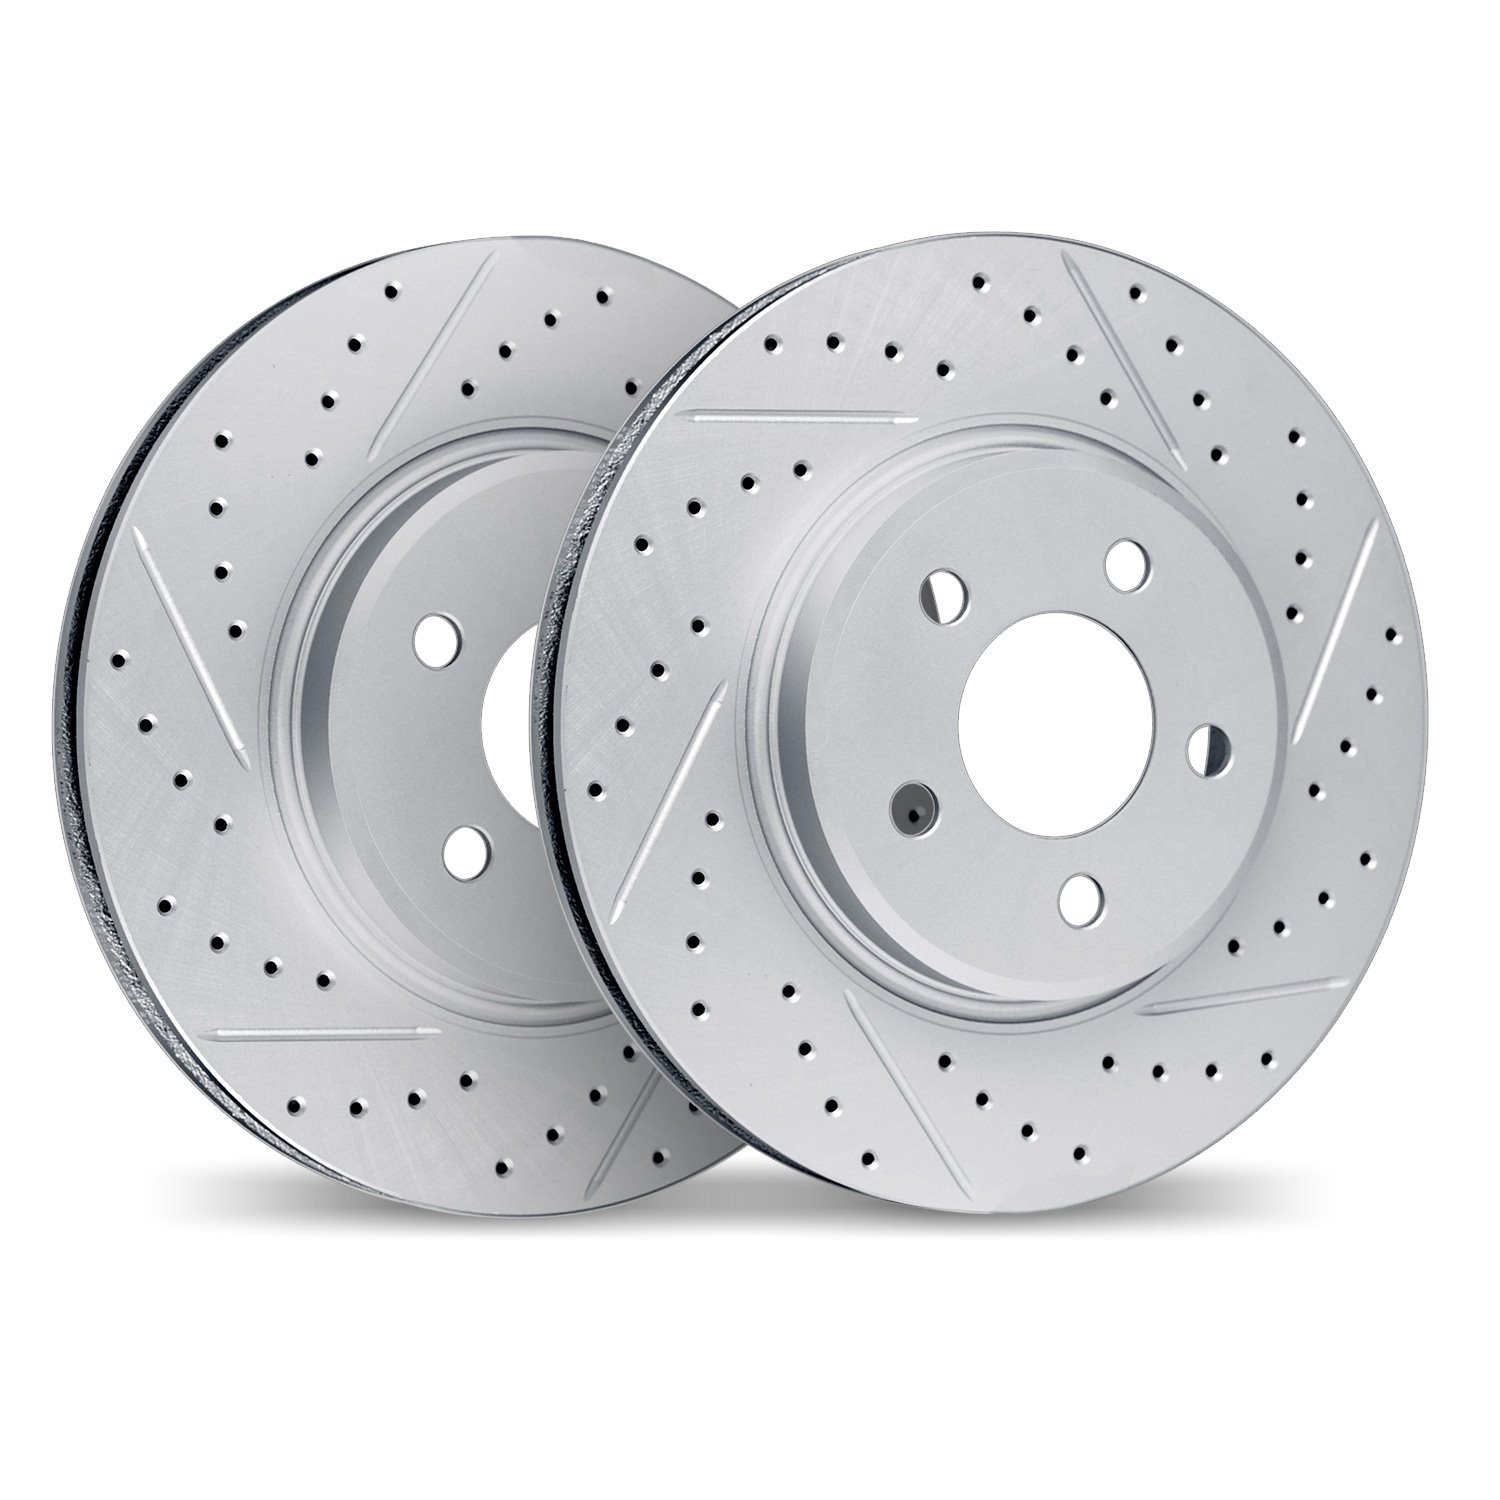 2002-54144 Geoperformance Drilled/Slotted Brake Rotors, Fits Select Ford/Lincoln/Mercury/Mazda, Position: Rear